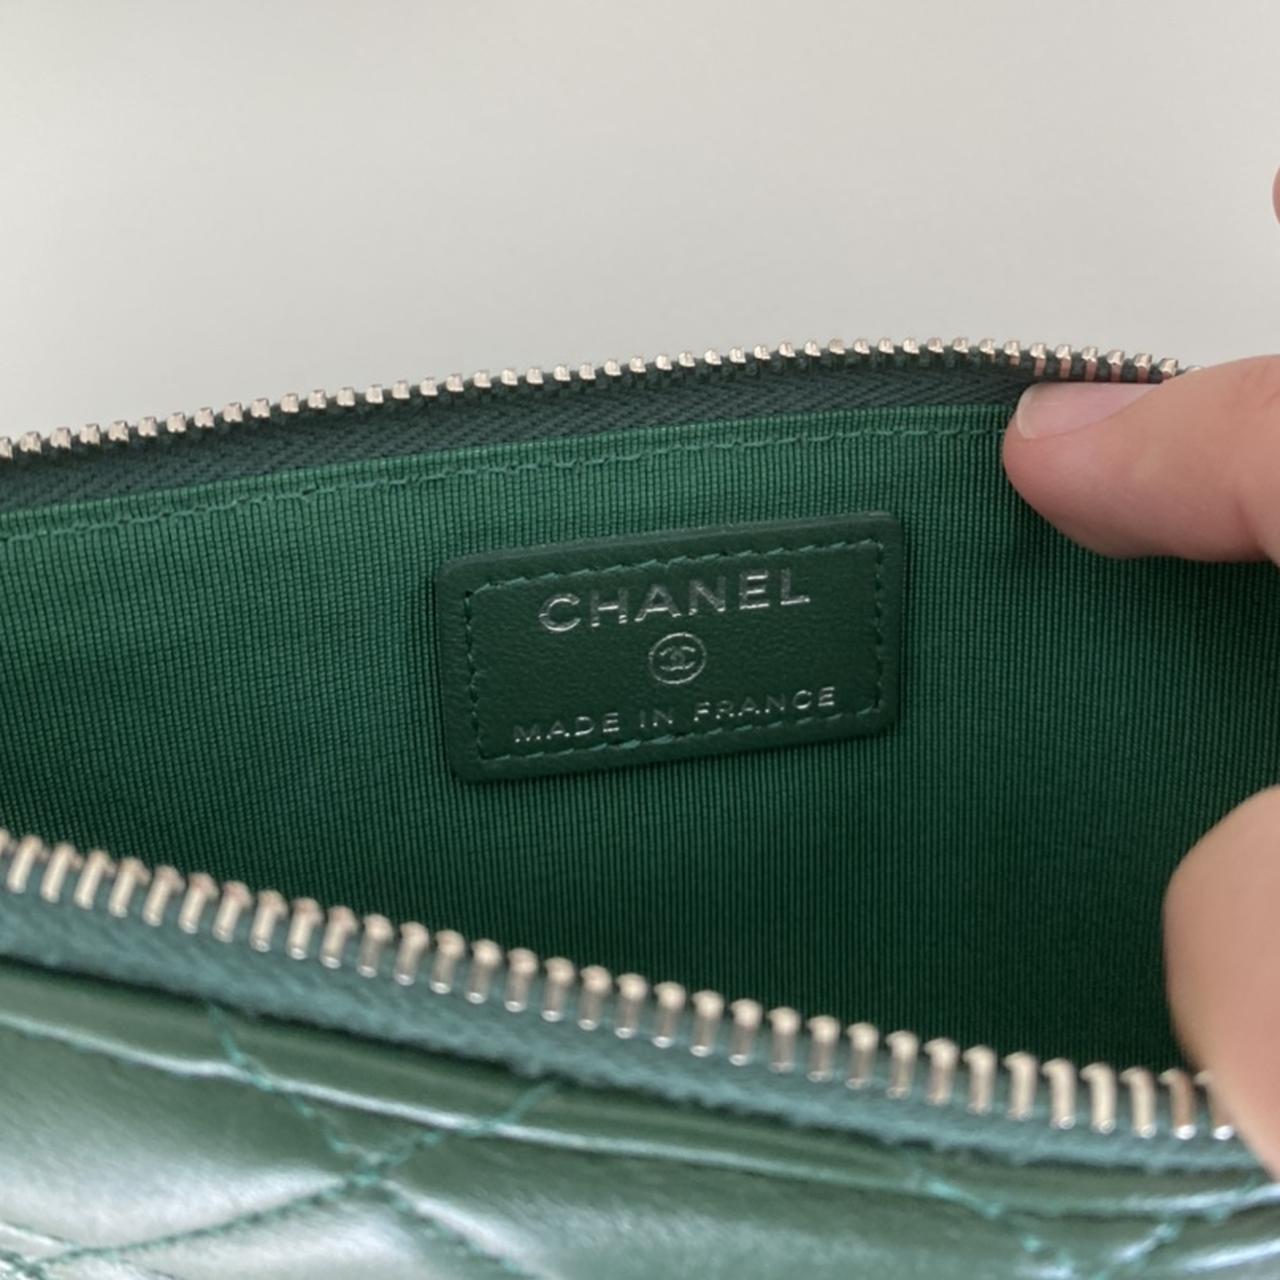 authentic chanel pink wallet